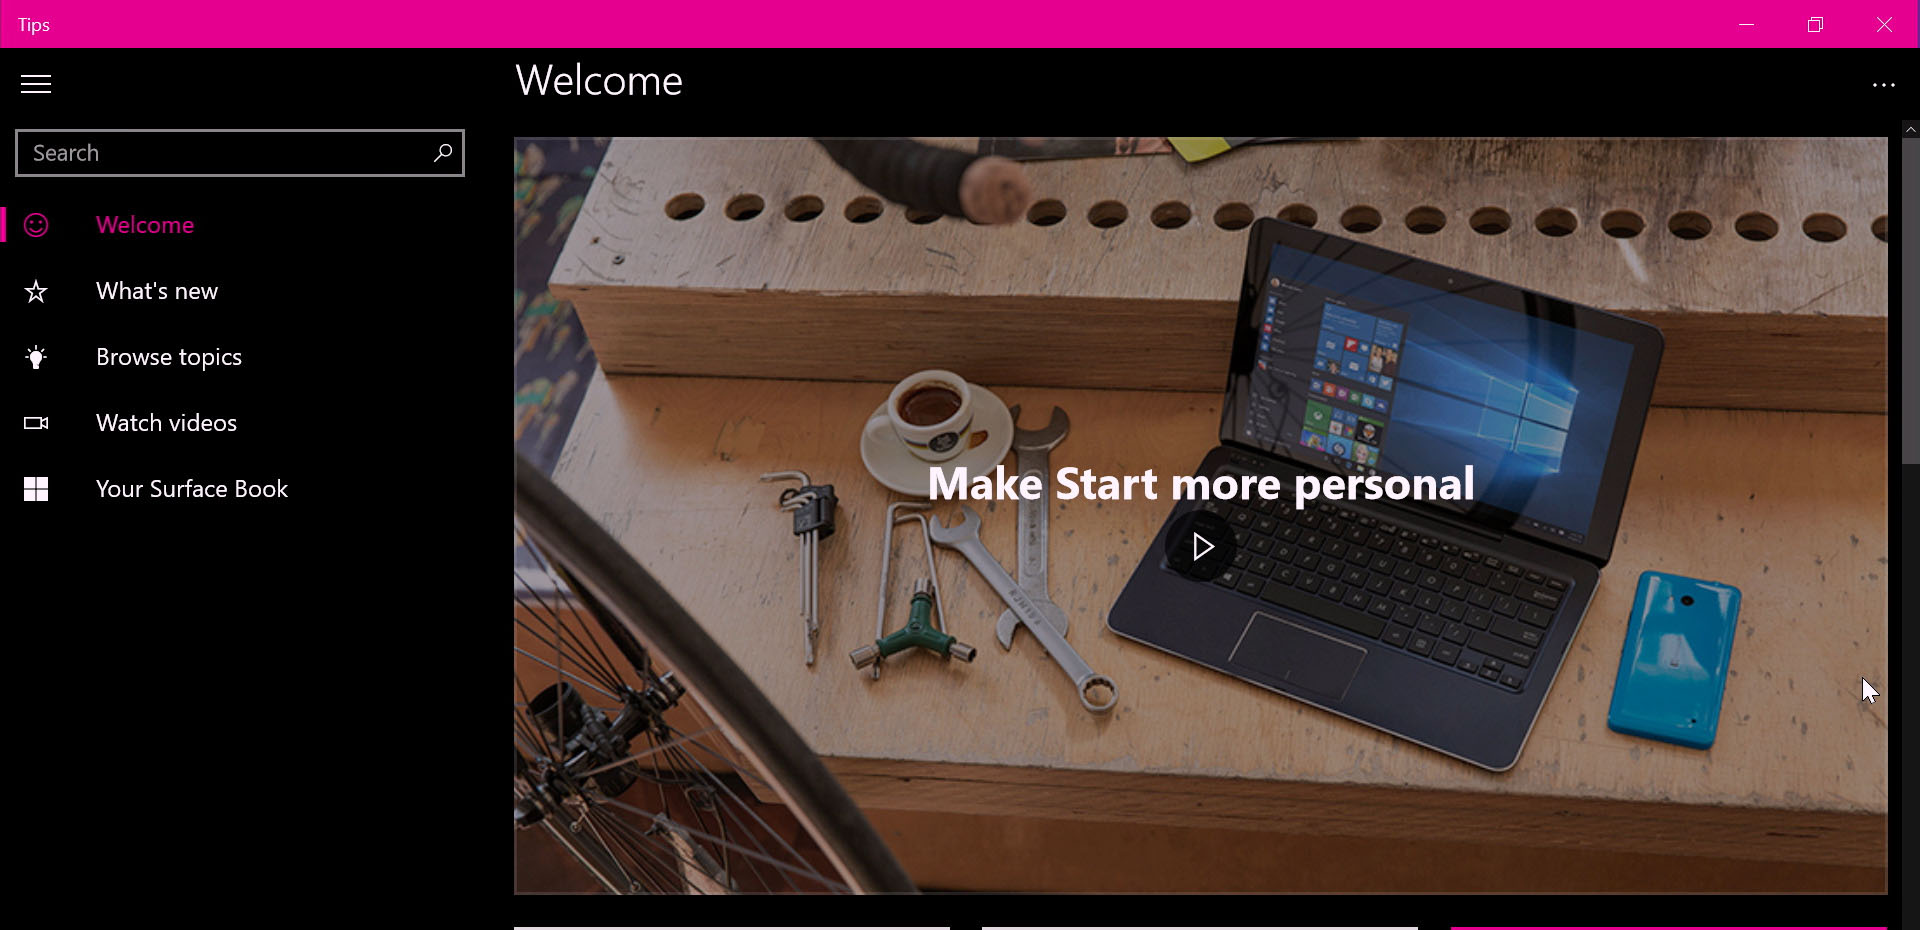 See what’s new in Windows at-a-glance with the Microsoft Tips app